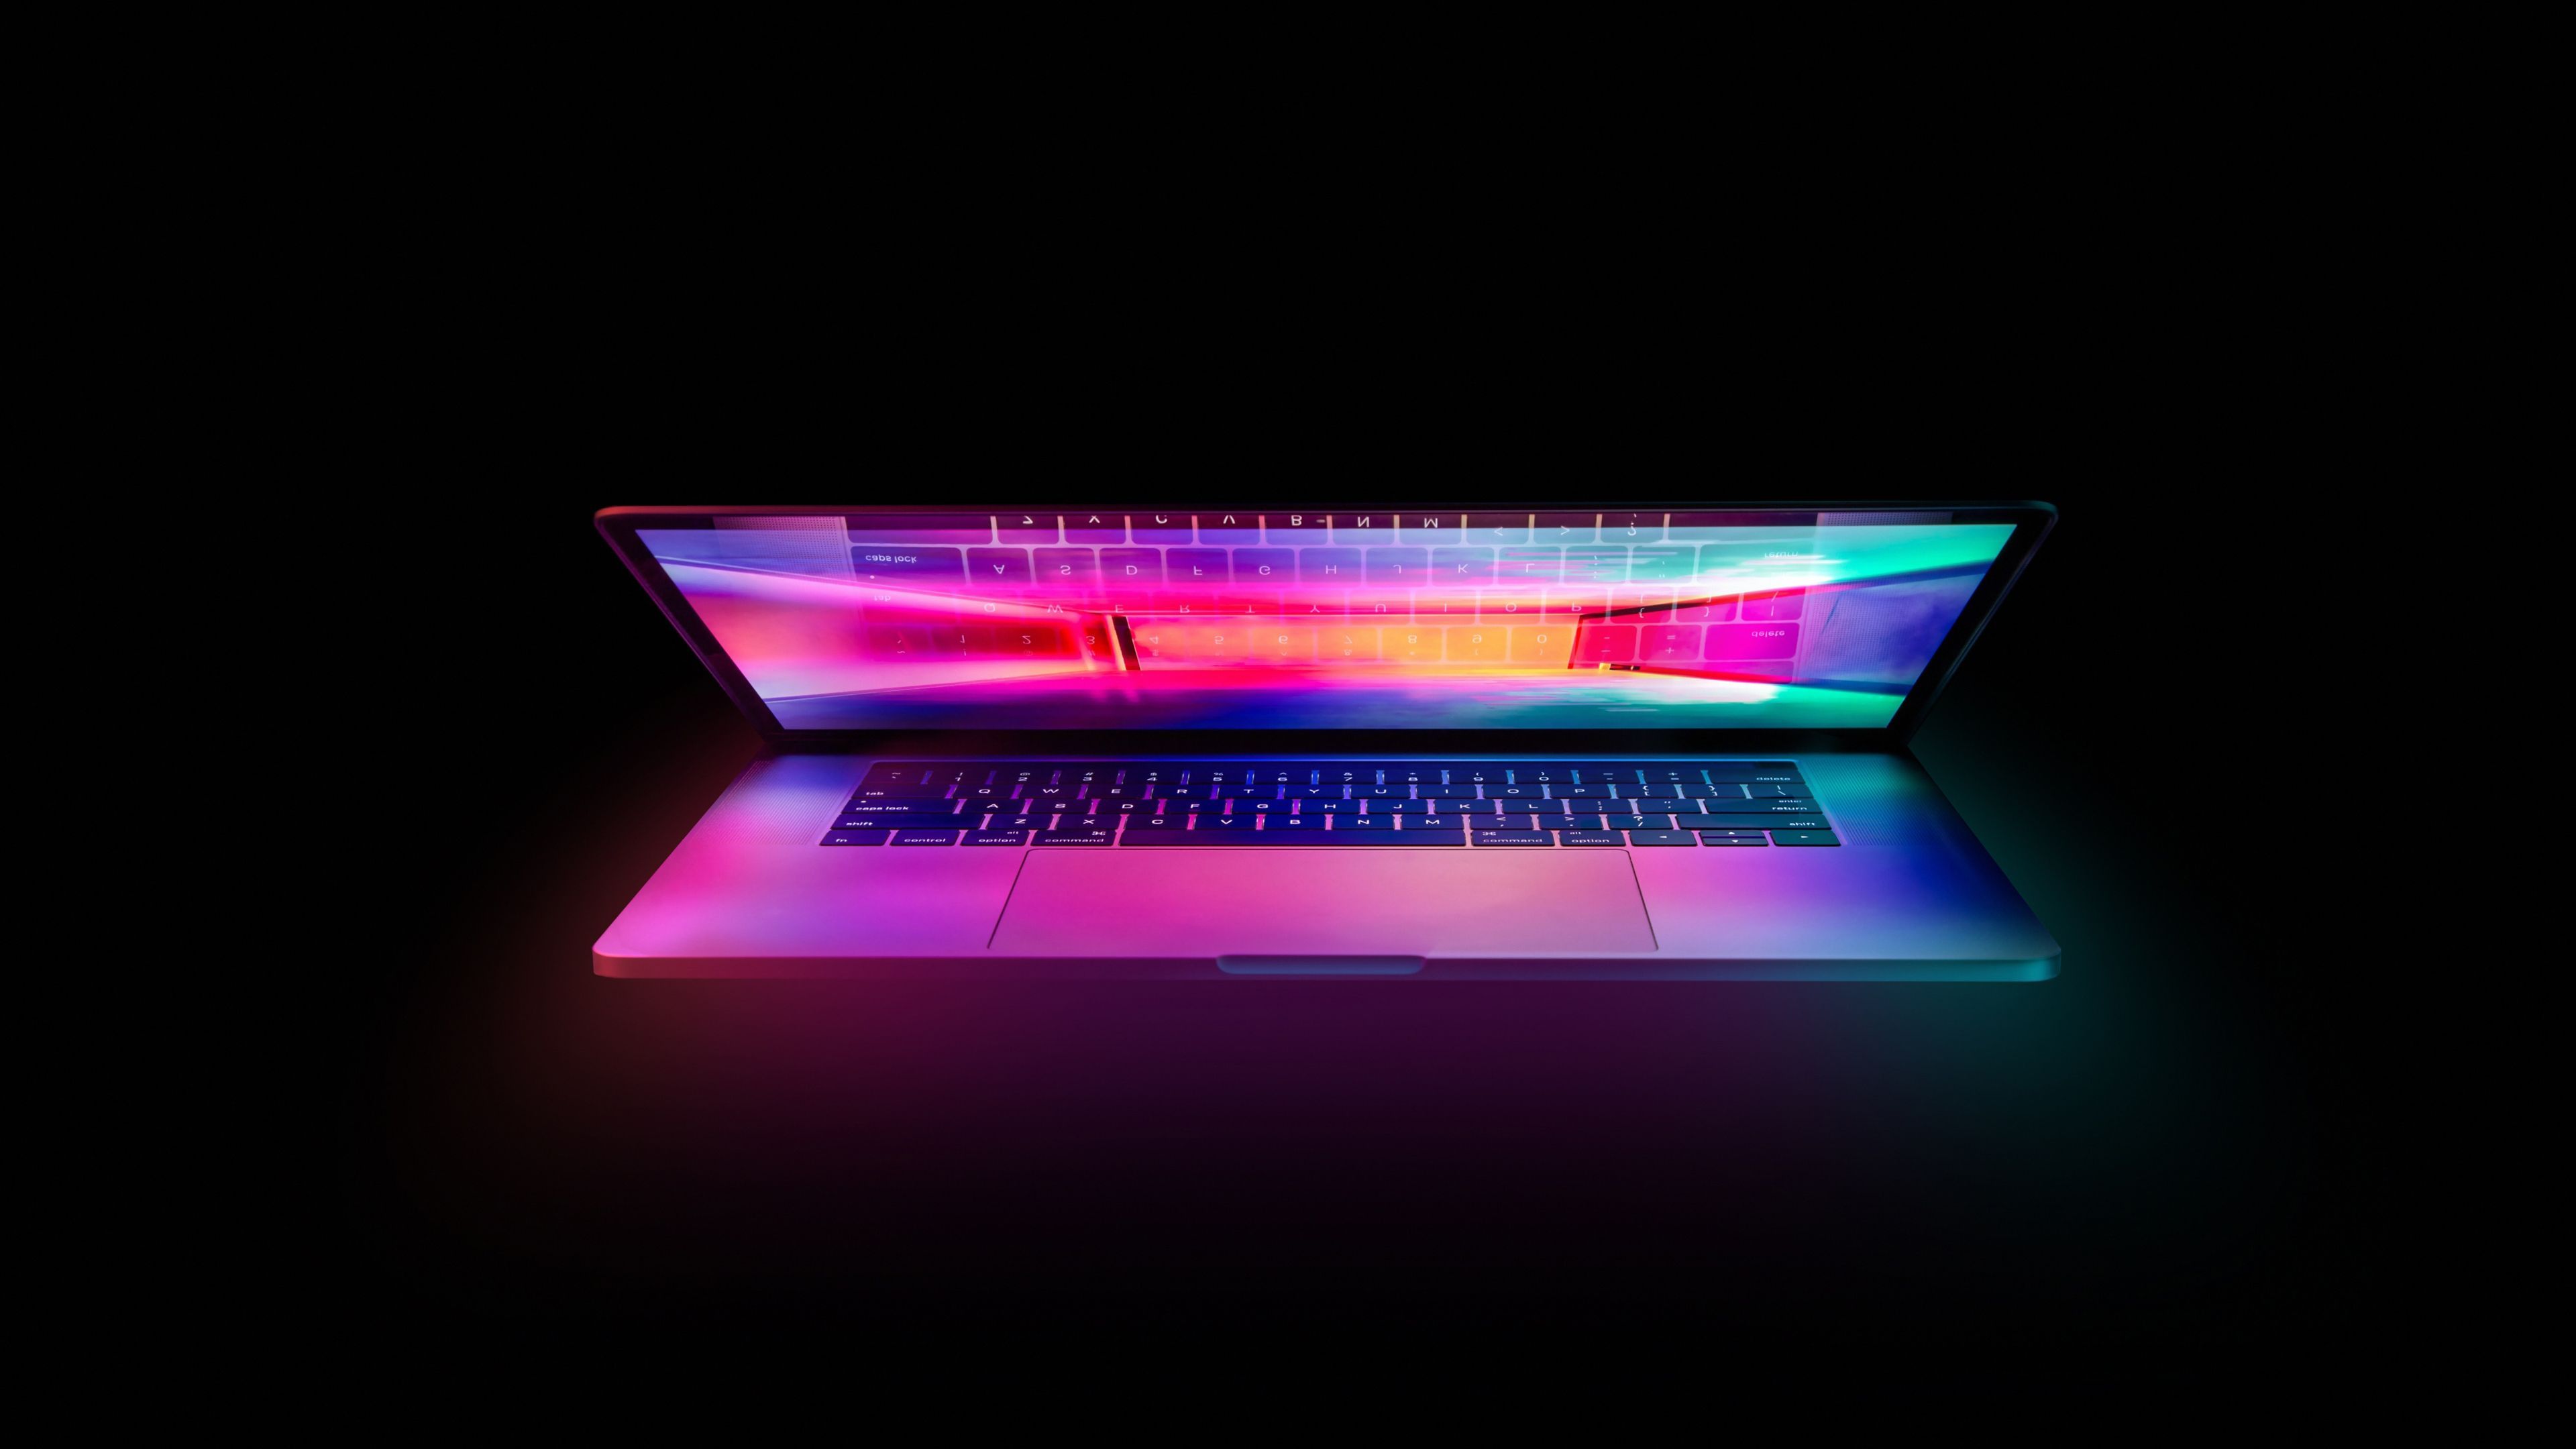 A laptop with a colorful display in a dark room - Laptop